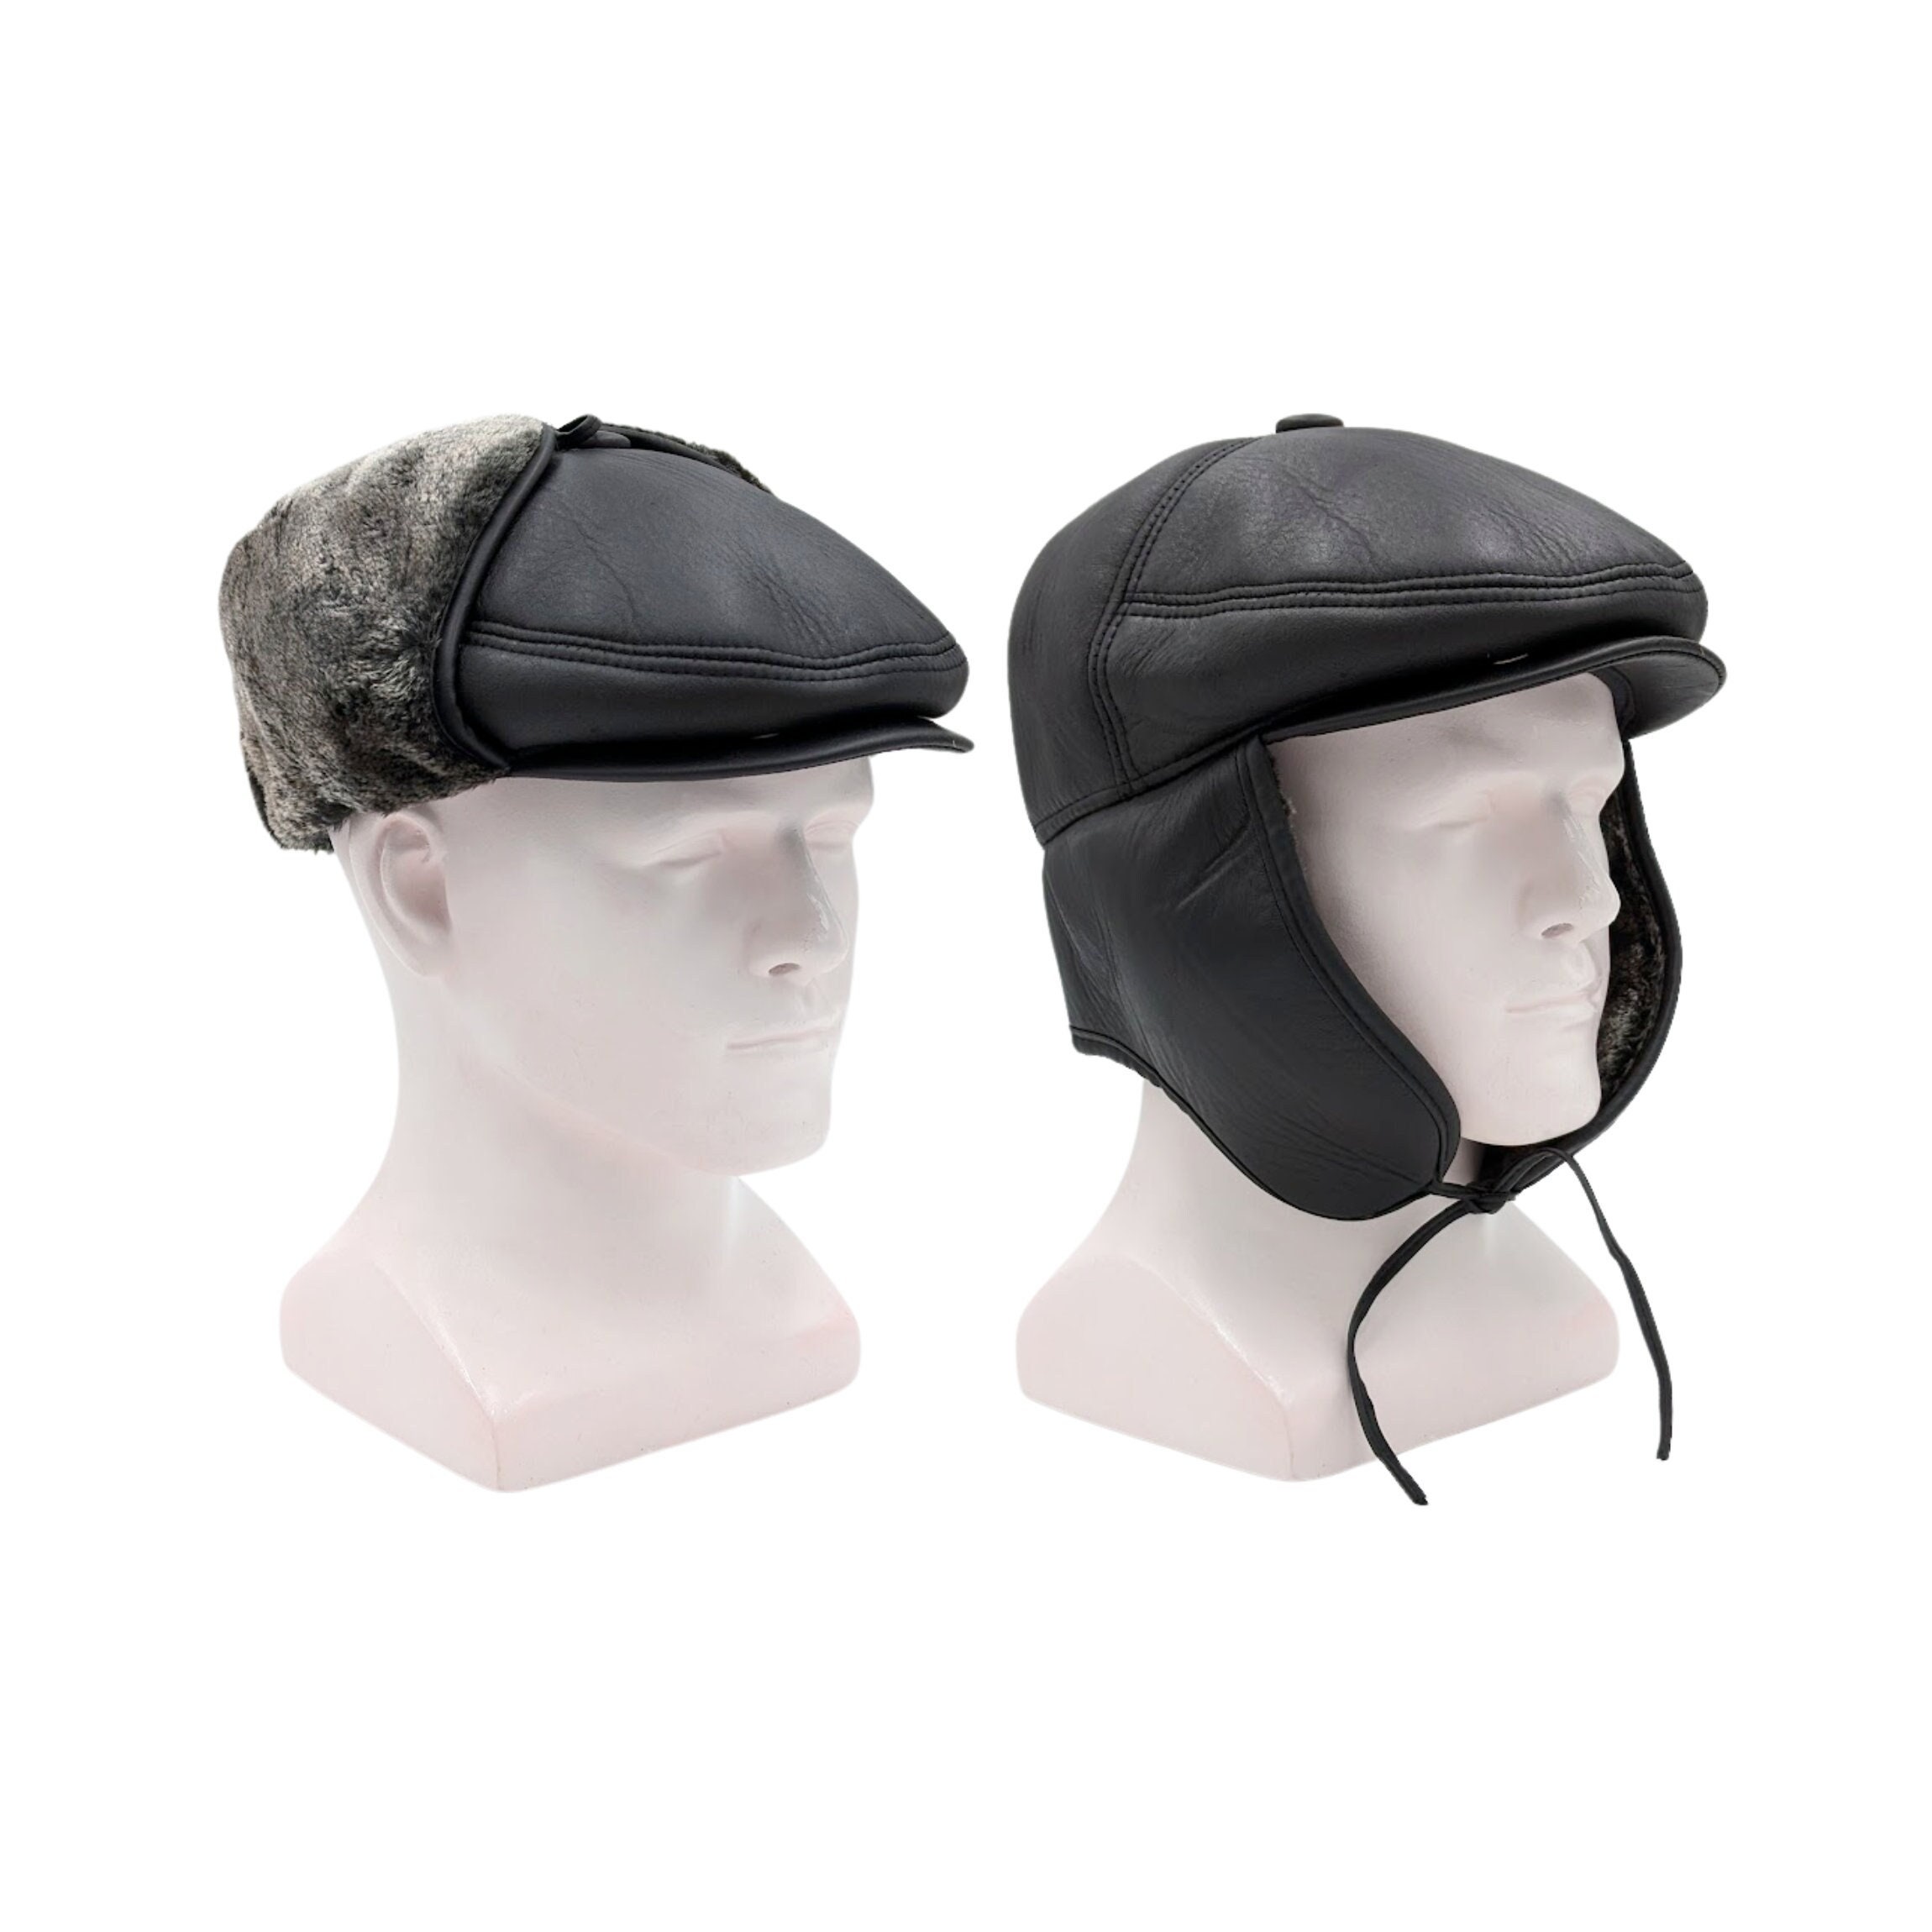 Men's Leather Flat Cap with Ear Flaps